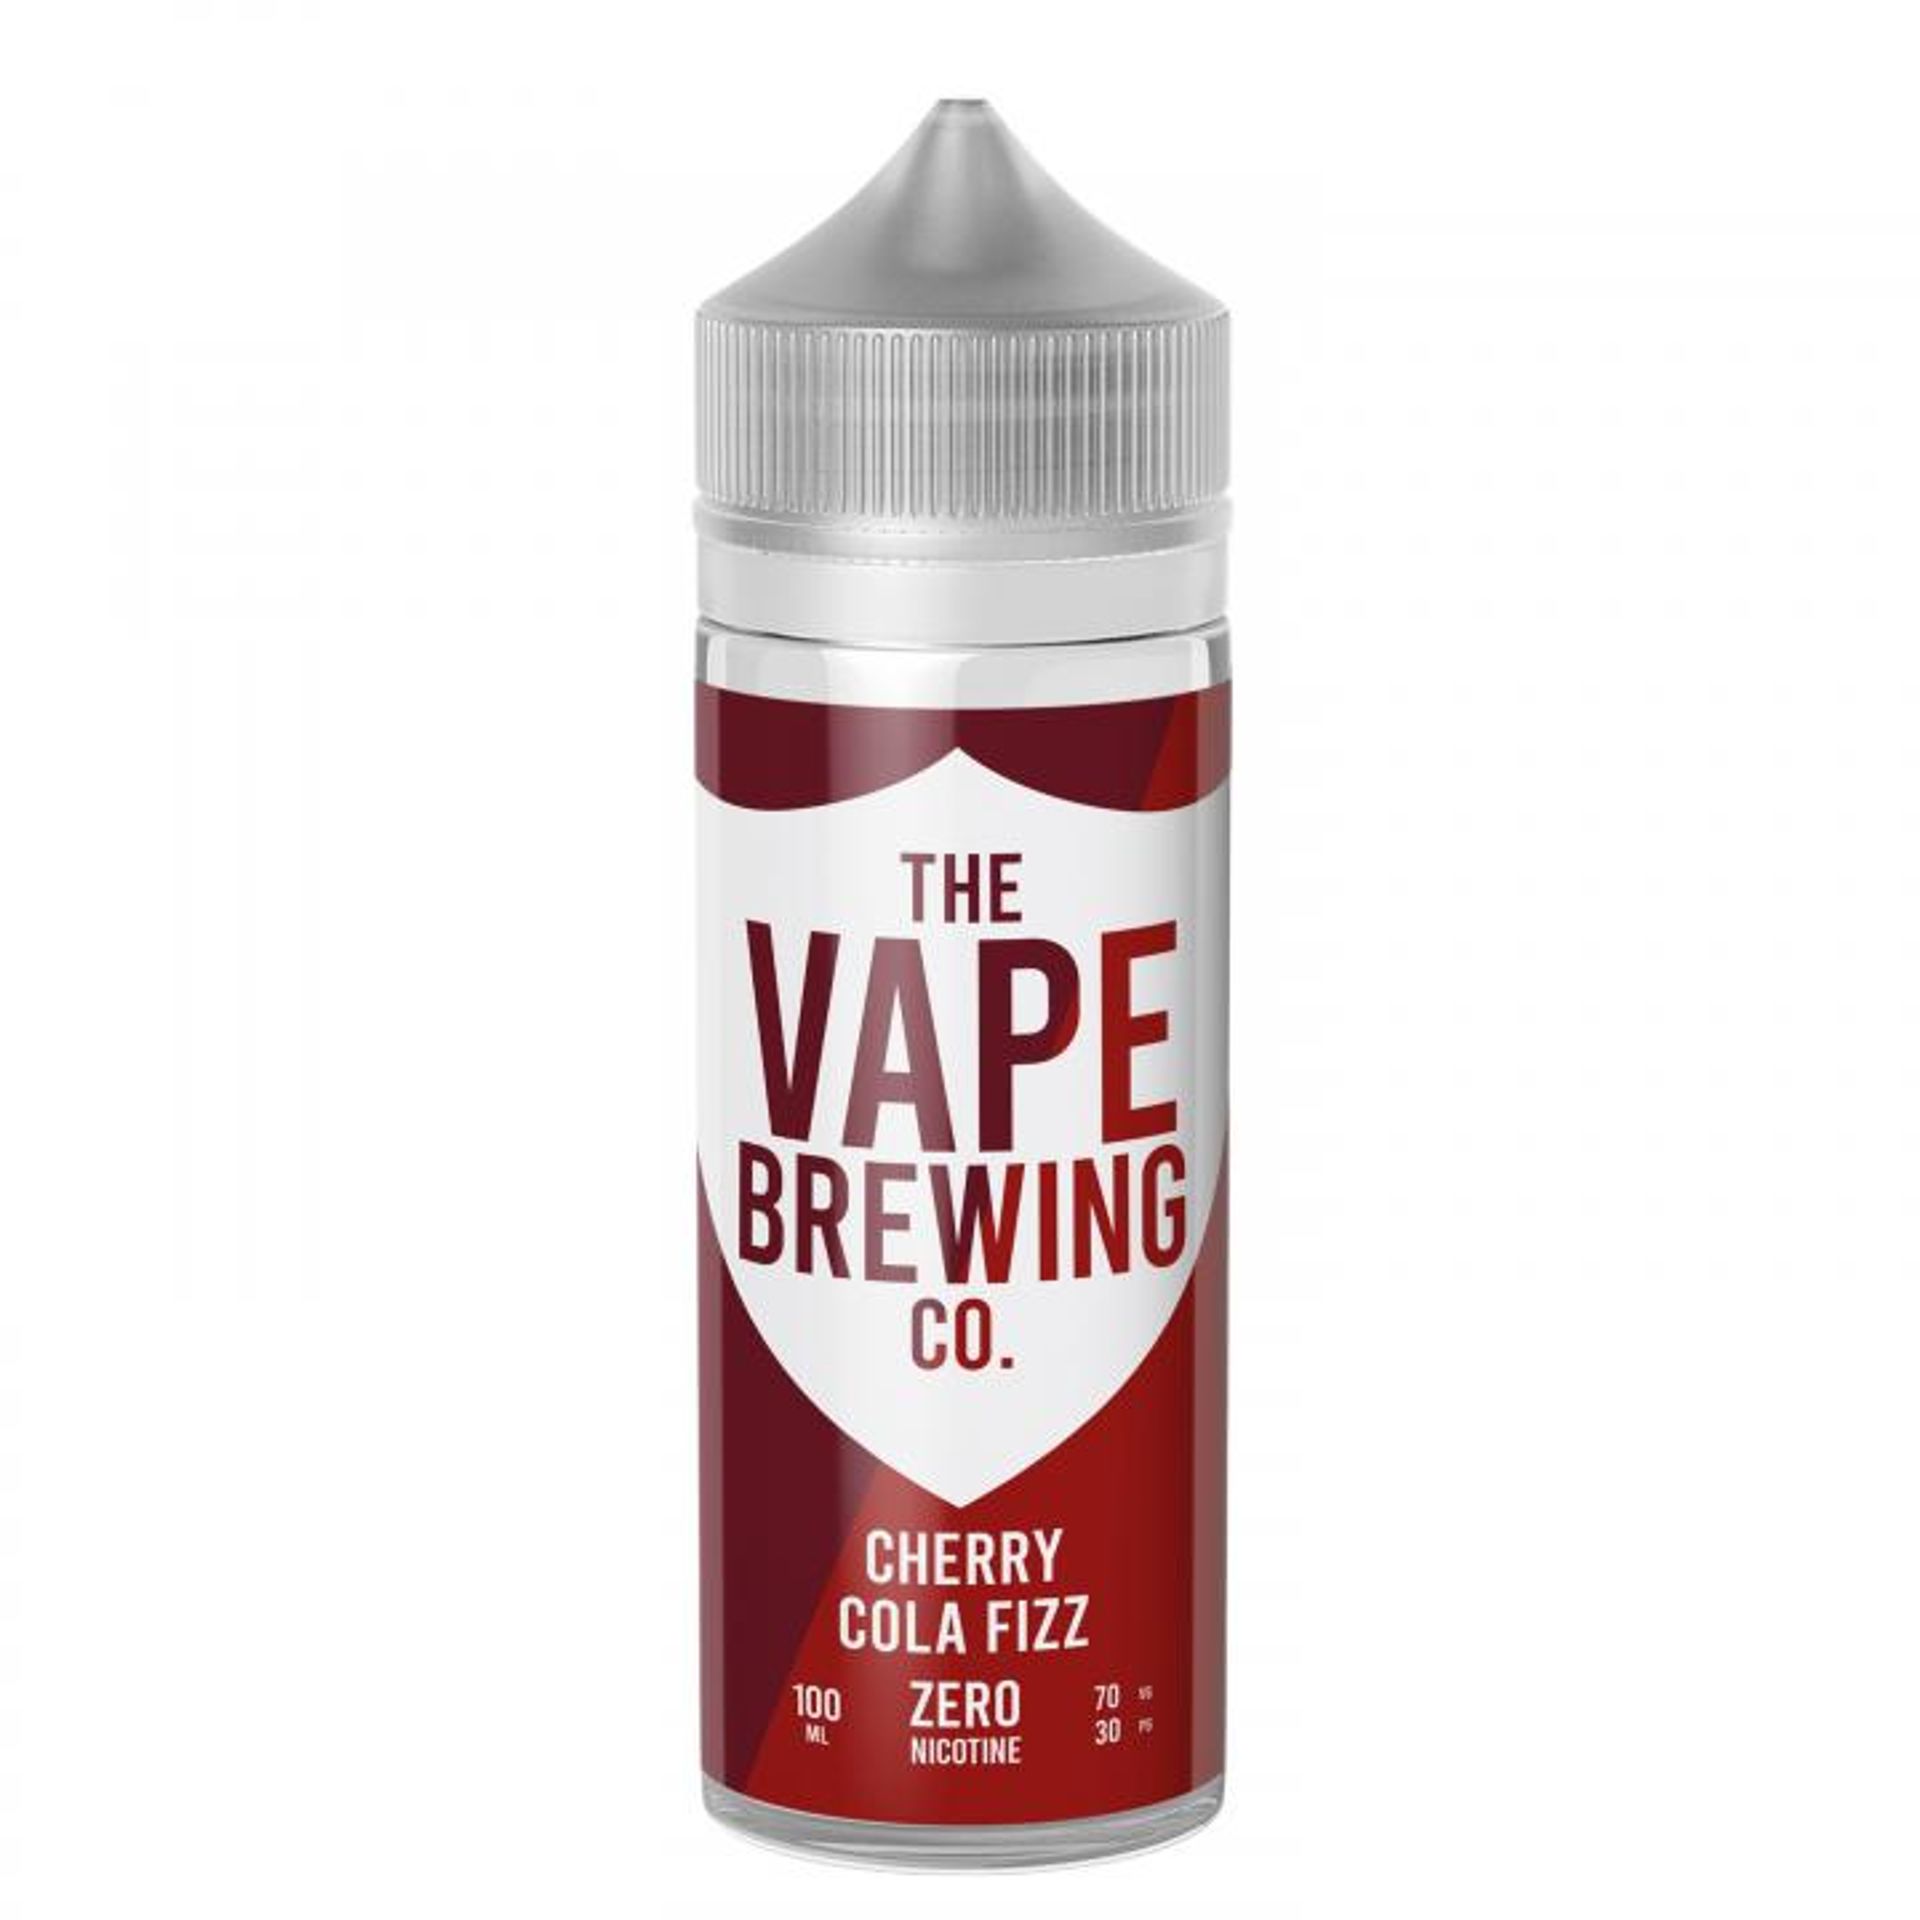 Image of Cherry Cola Fizz by The Vape Brewing Co